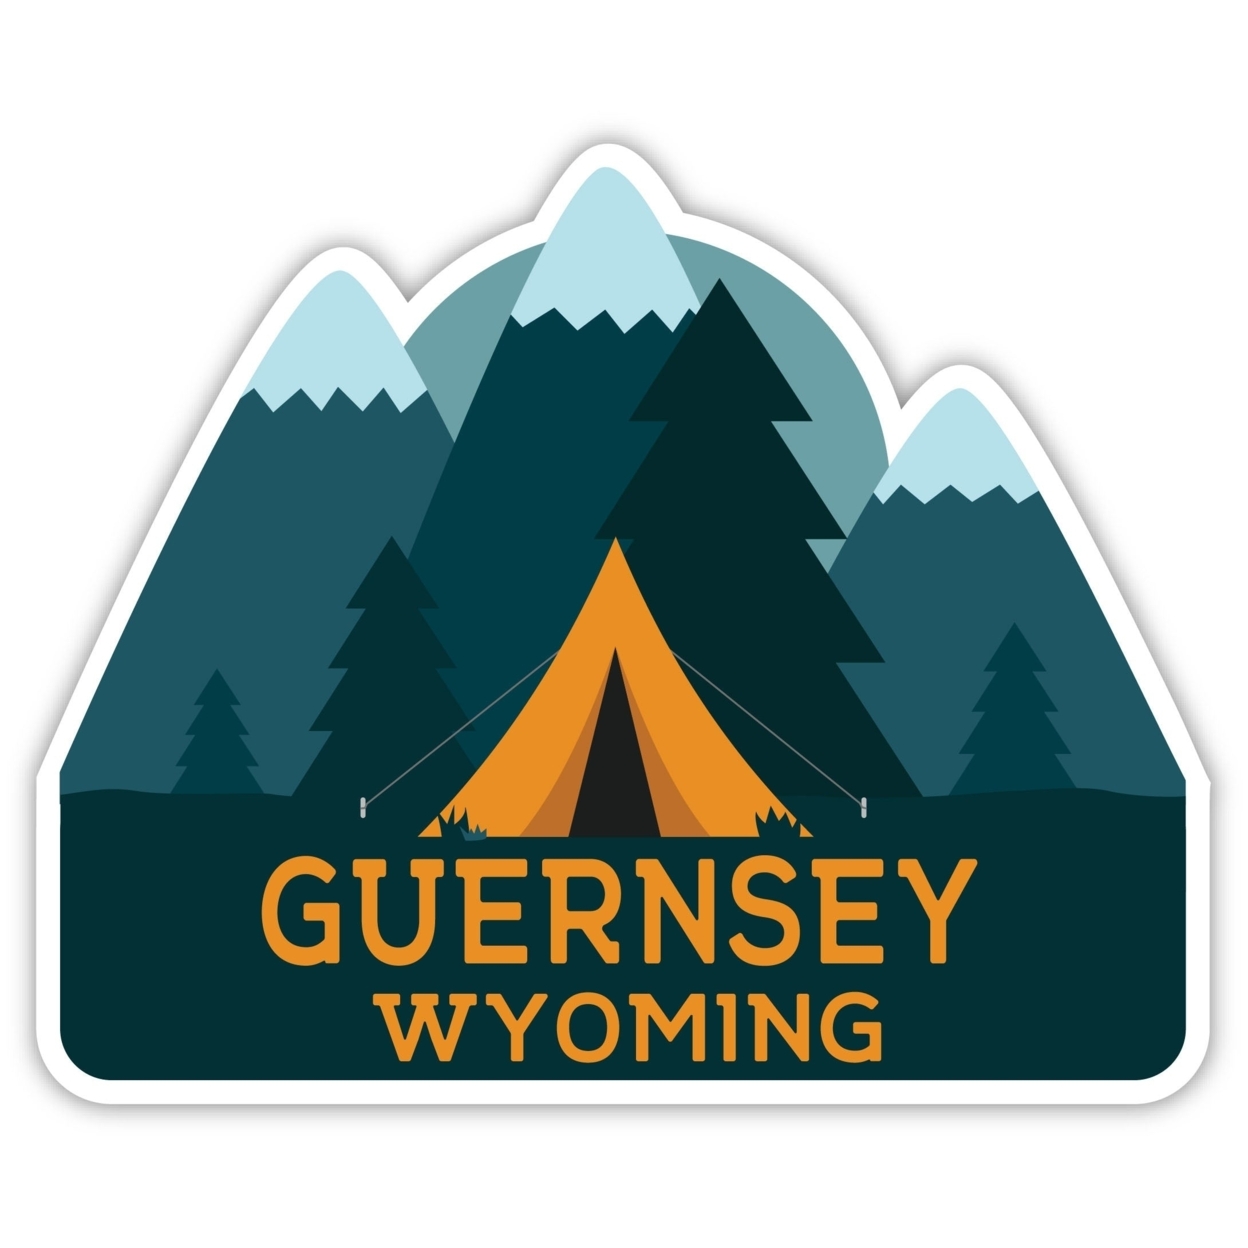 Guernsey Wyoming Souvenir Decorative Stickers (Choose Theme And Size) - Single Unit, 2-Inch, Tent